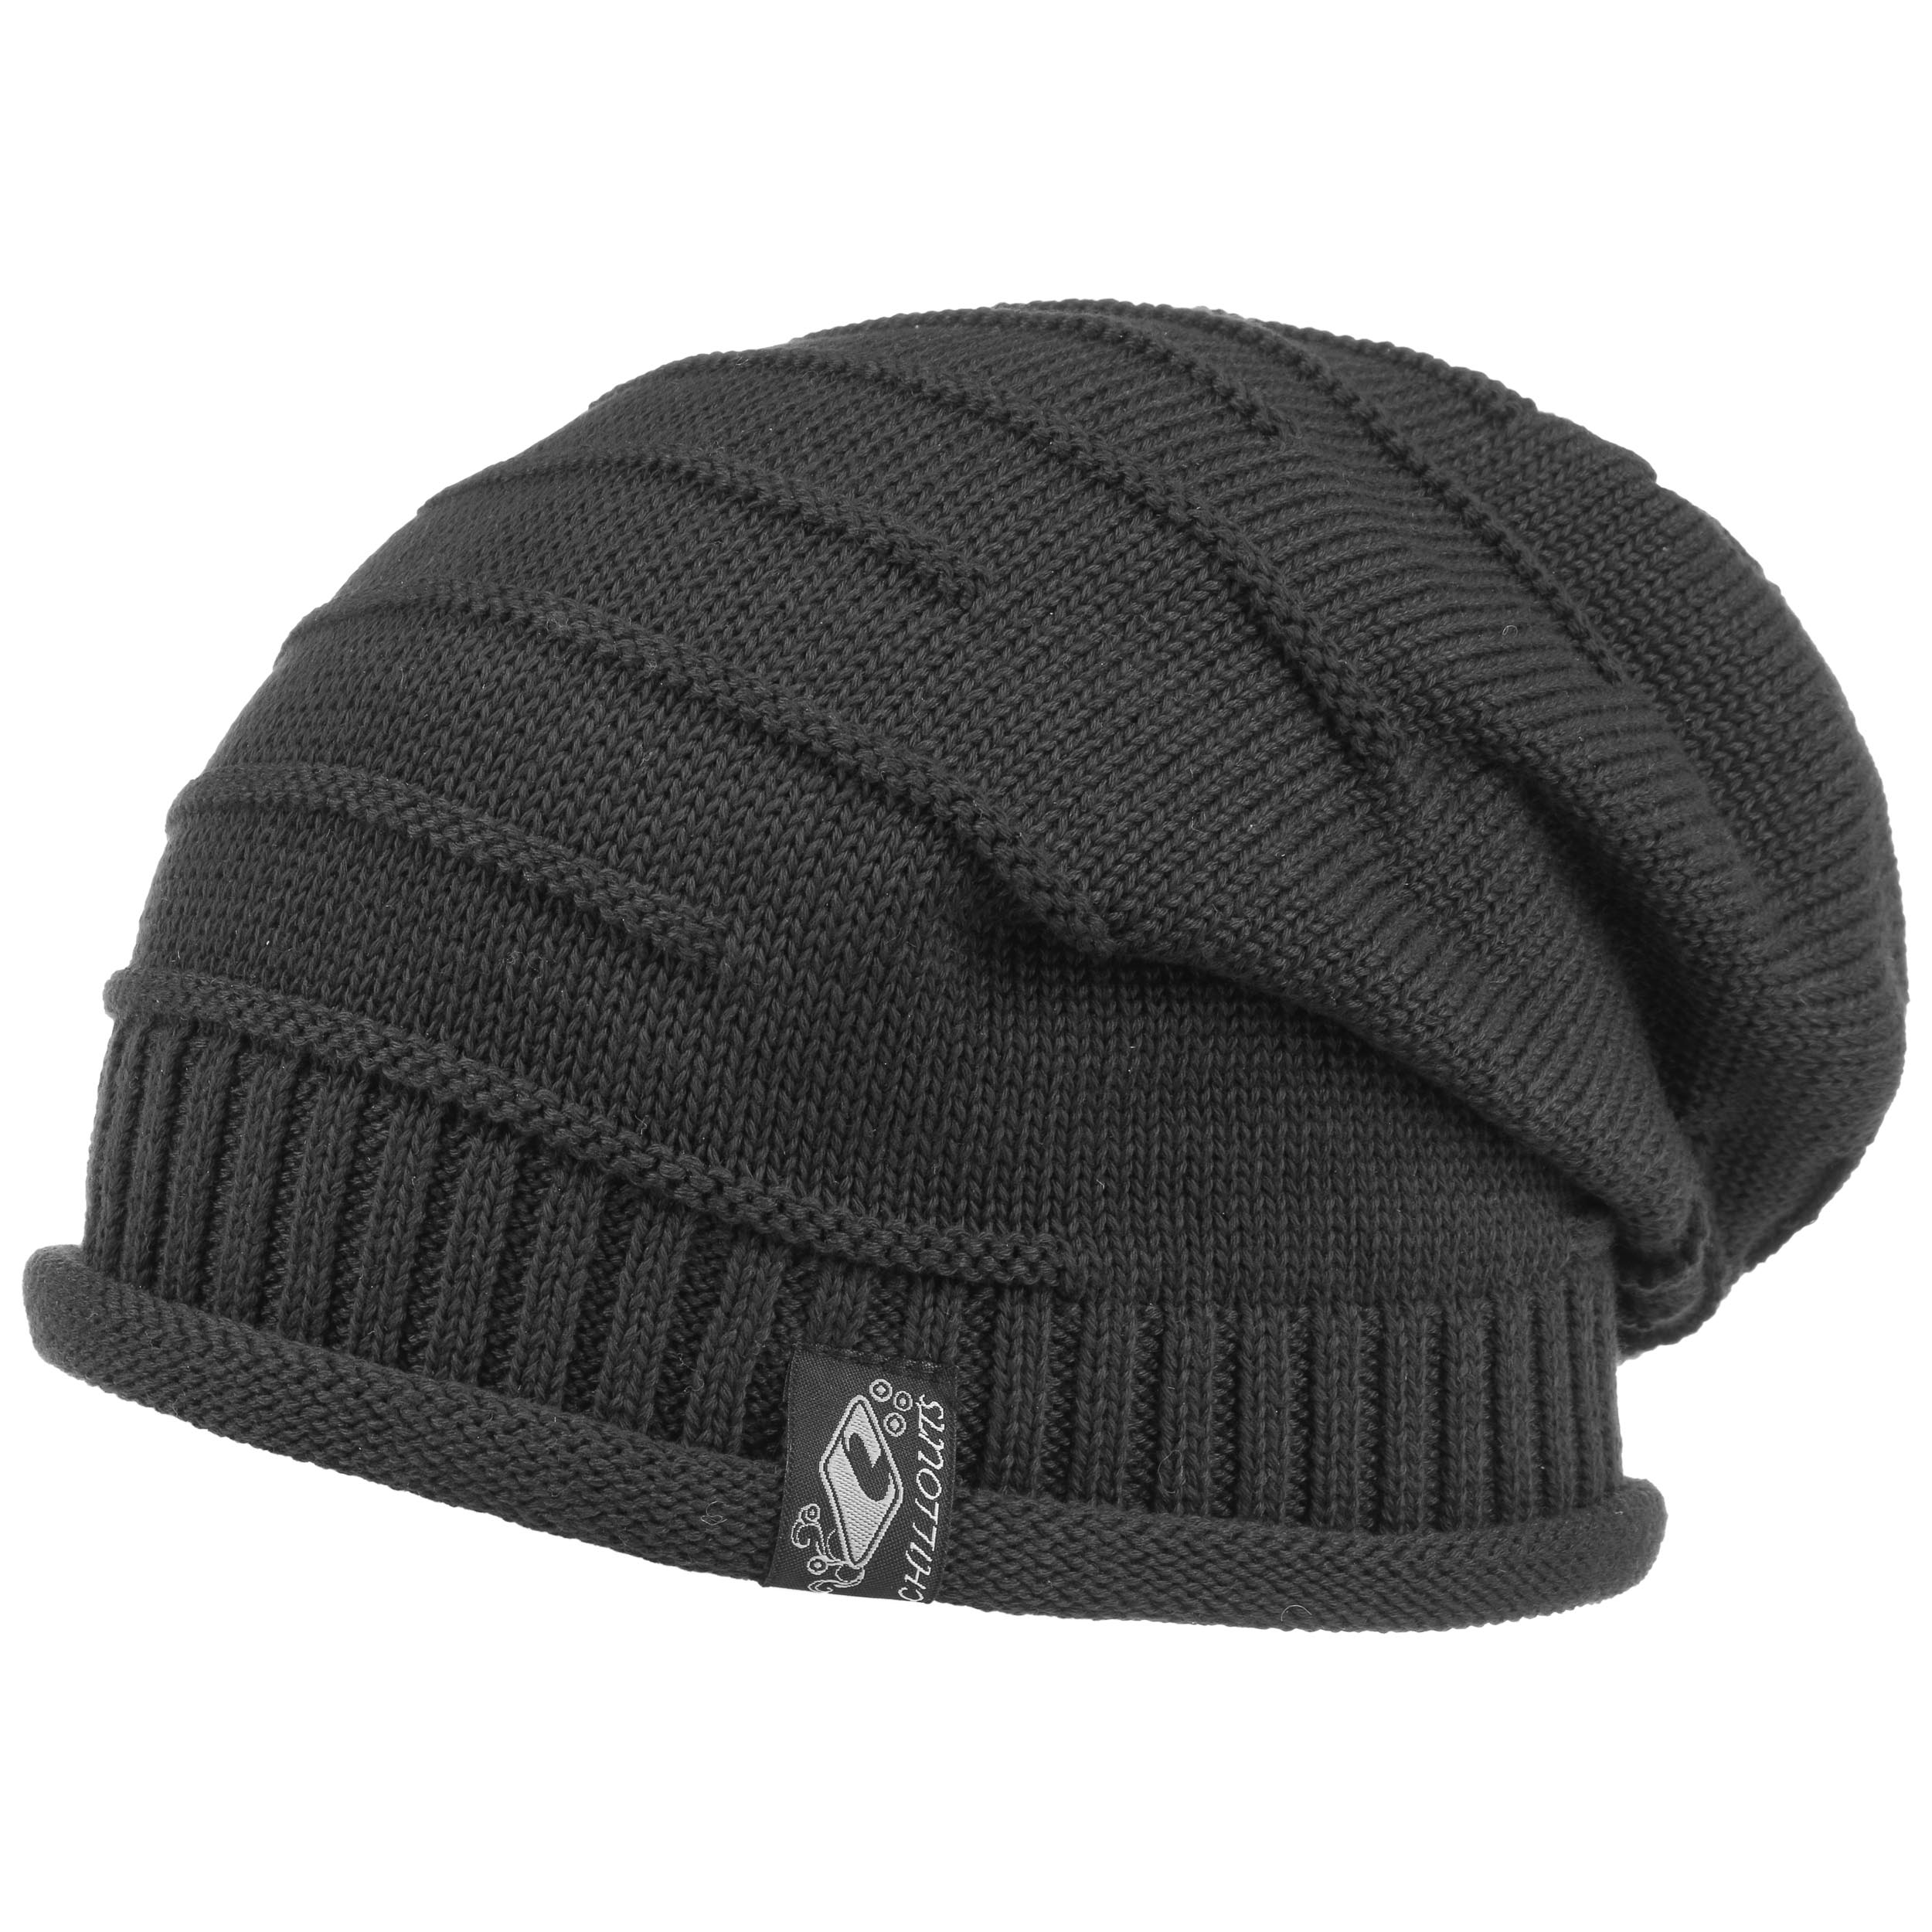 Erik-Oversize-Beanie-by-Chillouts.37270a.jpg